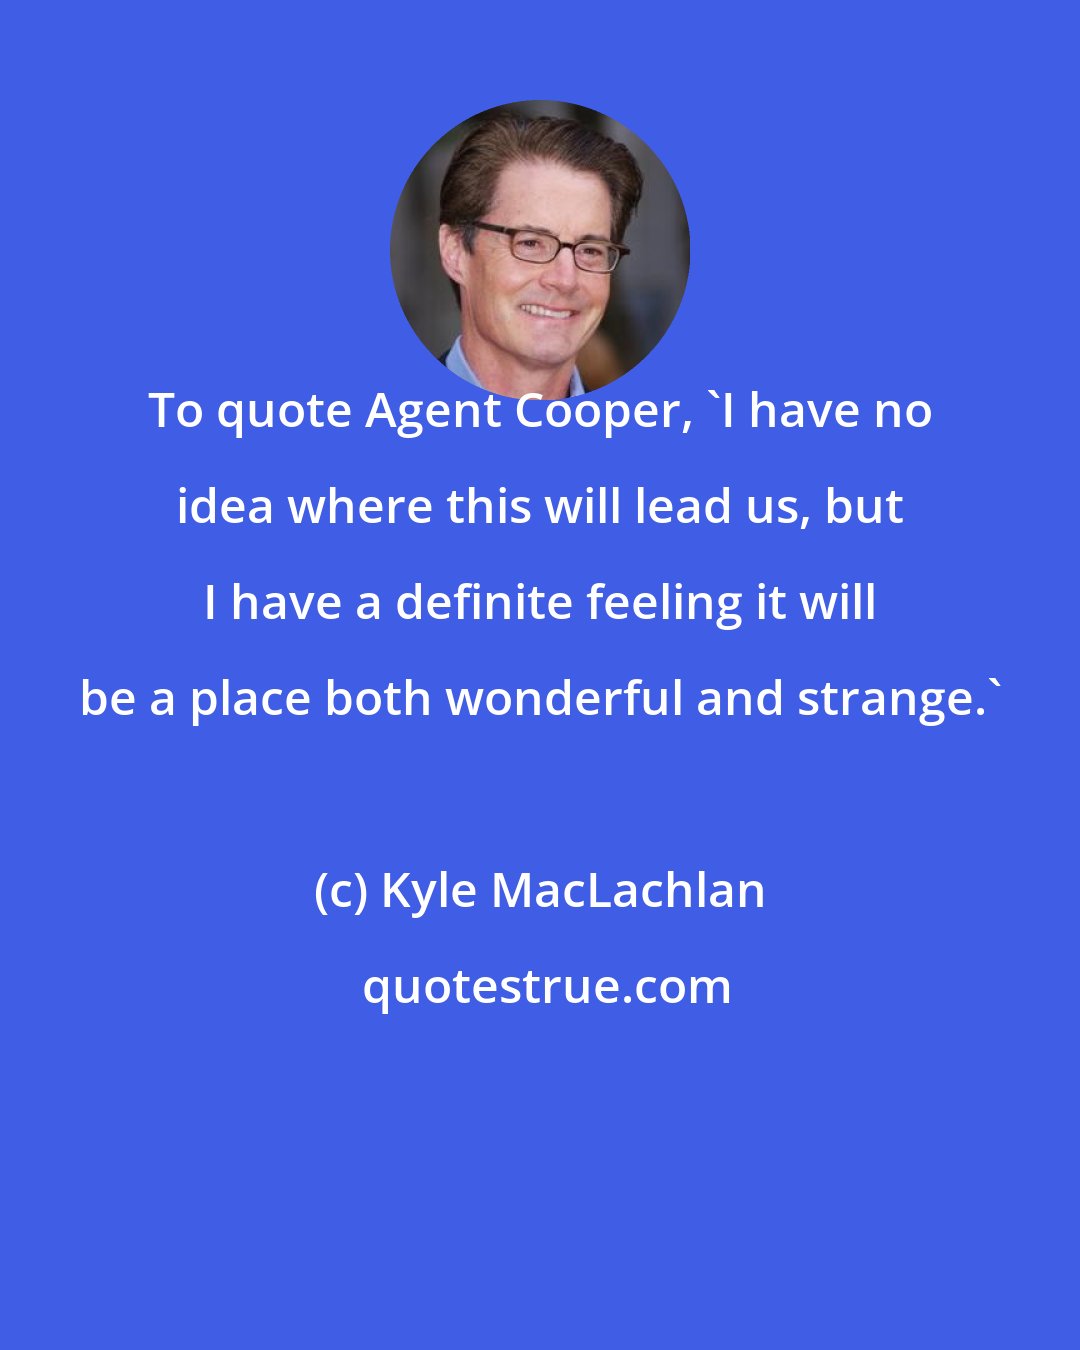 Kyle MacLachlan: To quote Agent Cooper, 'I have no idea where this will lead us, but I have a definite feeling it will be a place both wonderful and strange.'